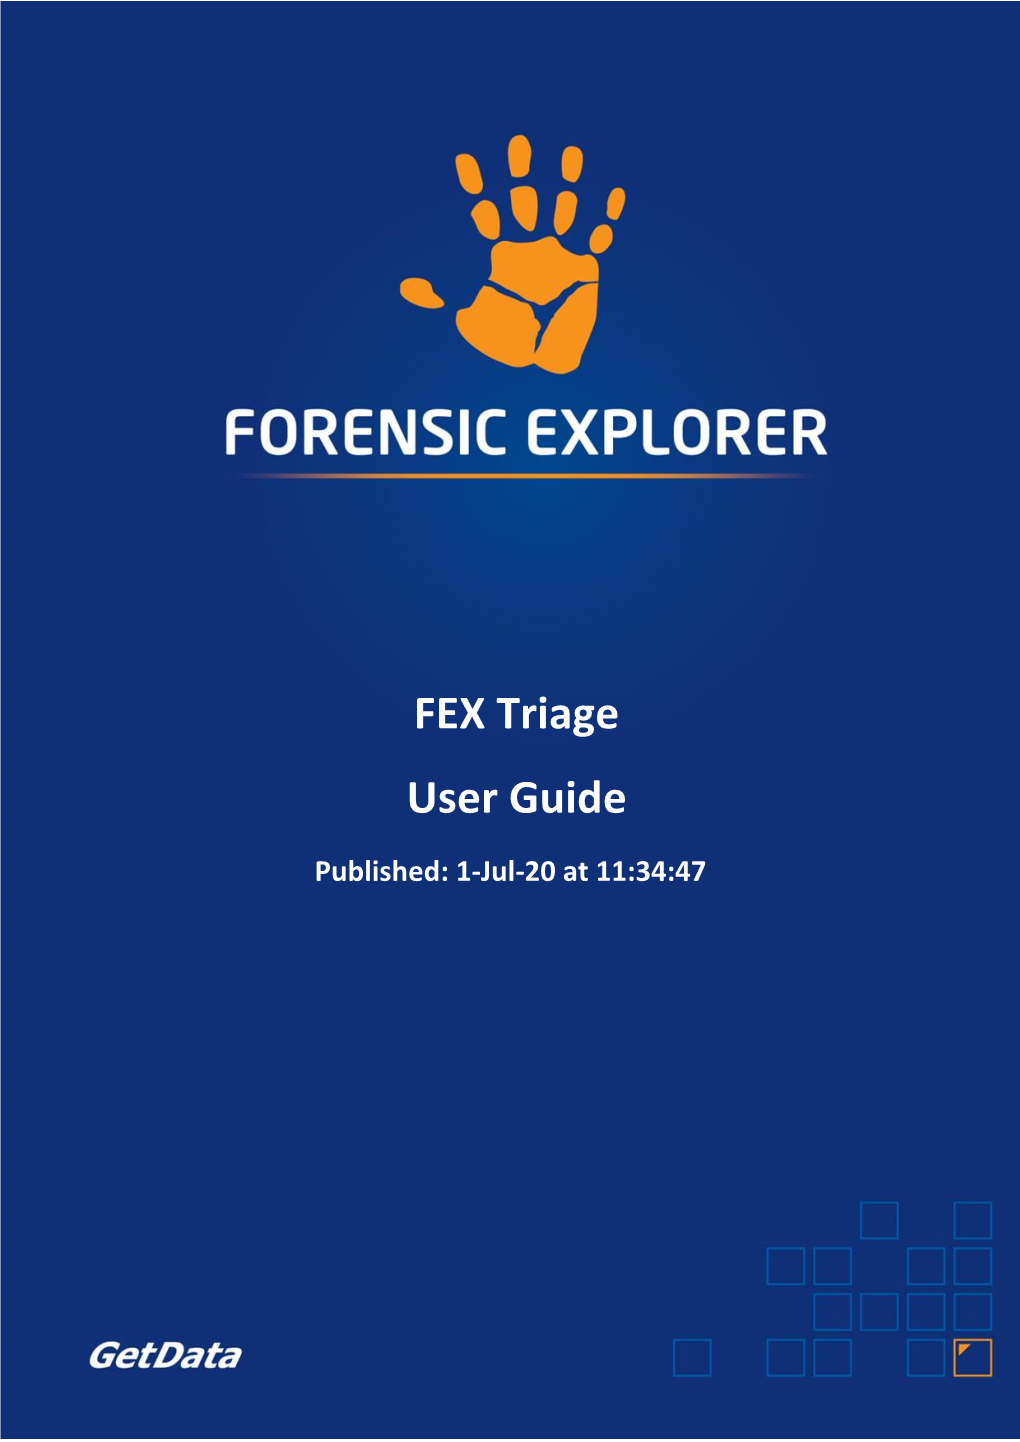 FEX Triage User Guide